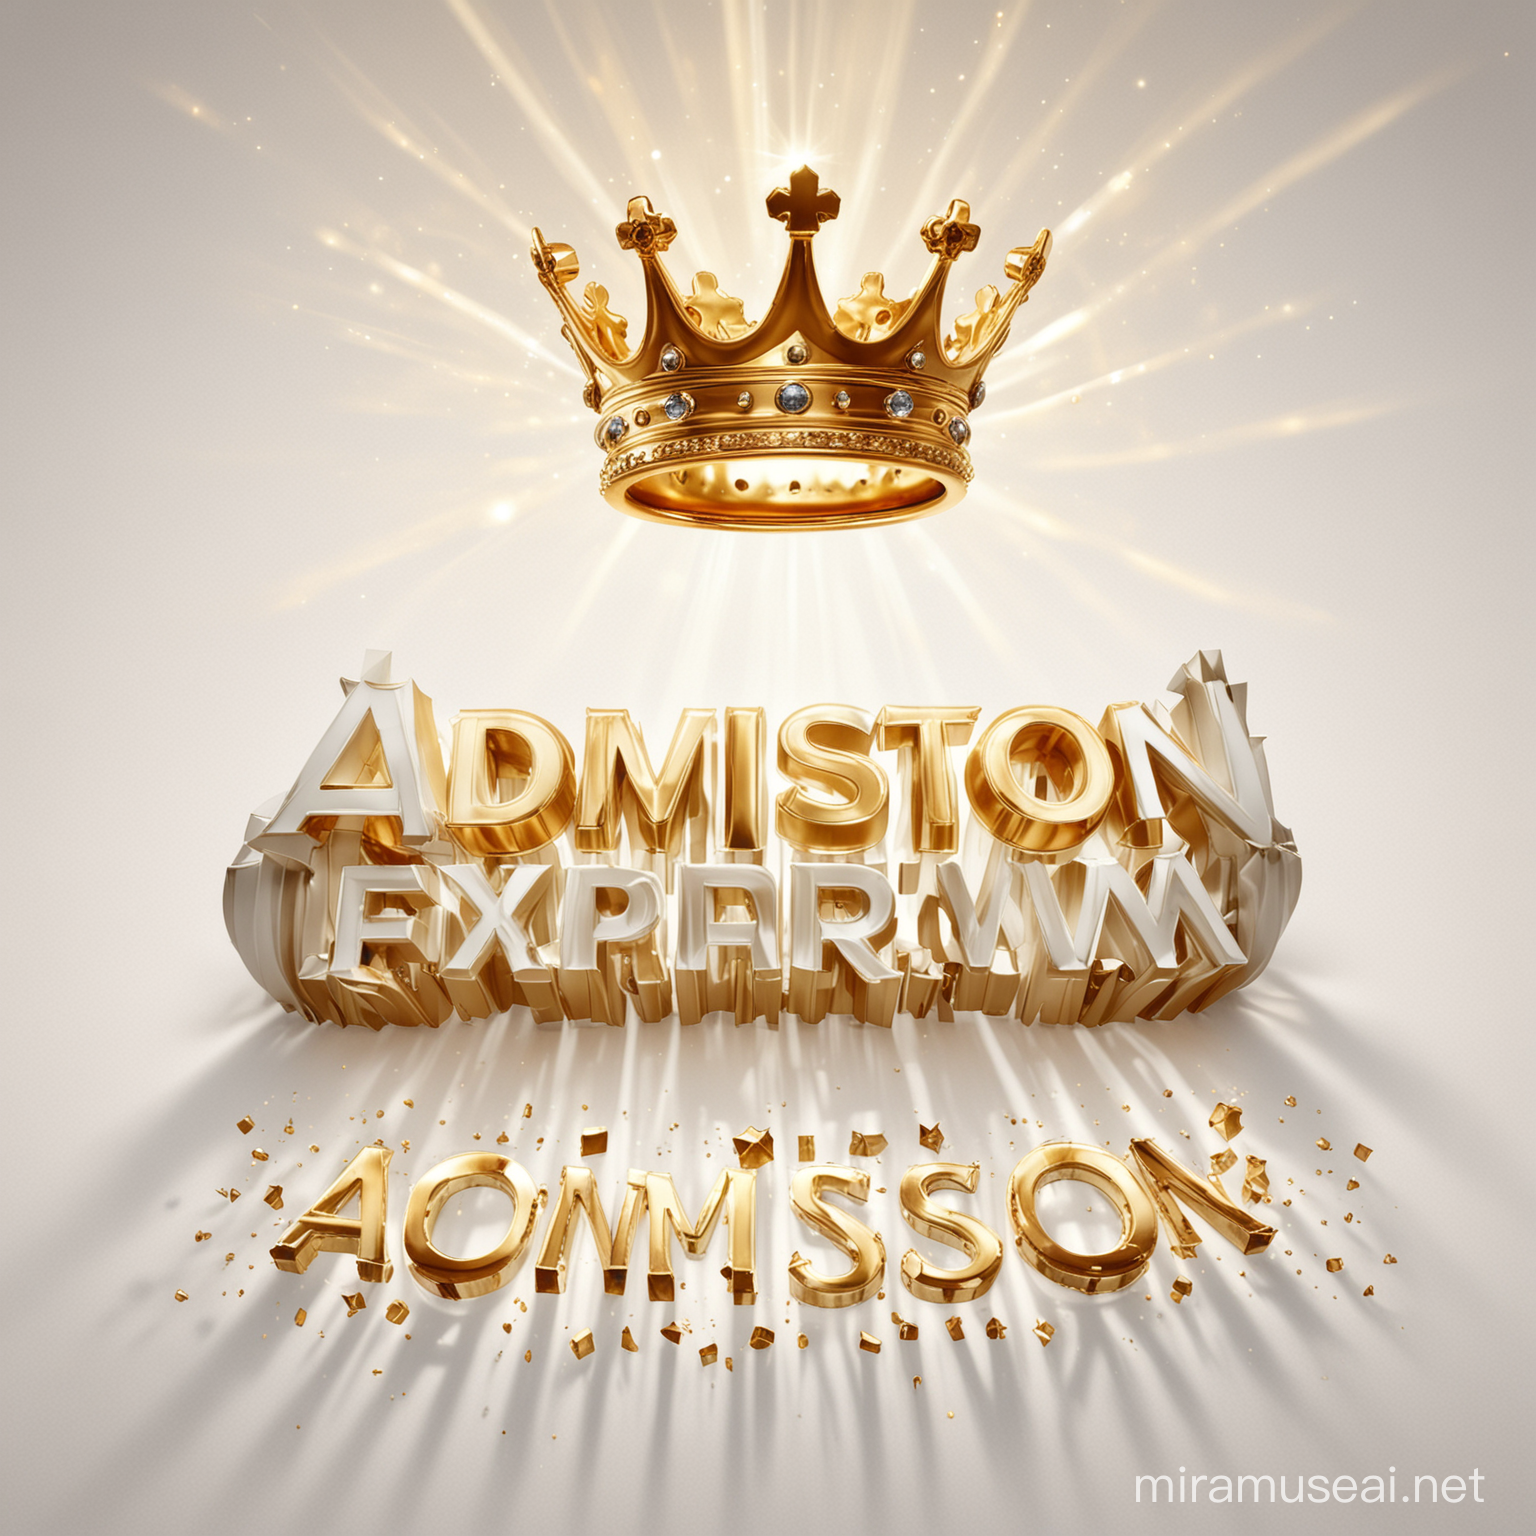 Radiant Admission Experts Sign with Golden Crown on White Background